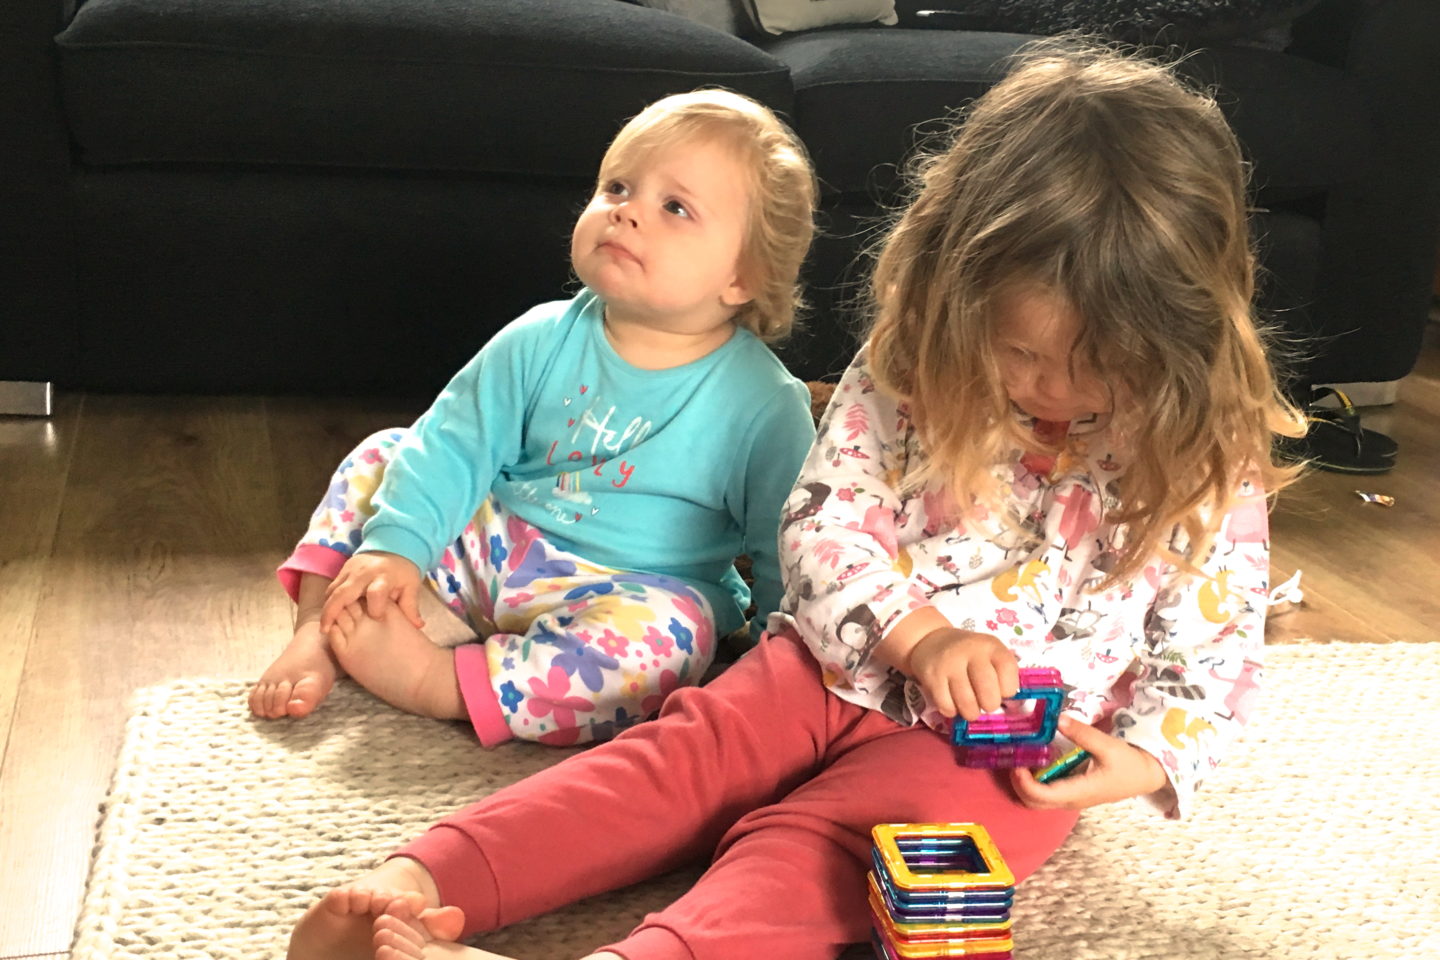 two and one year old sisters sitting together on a rug